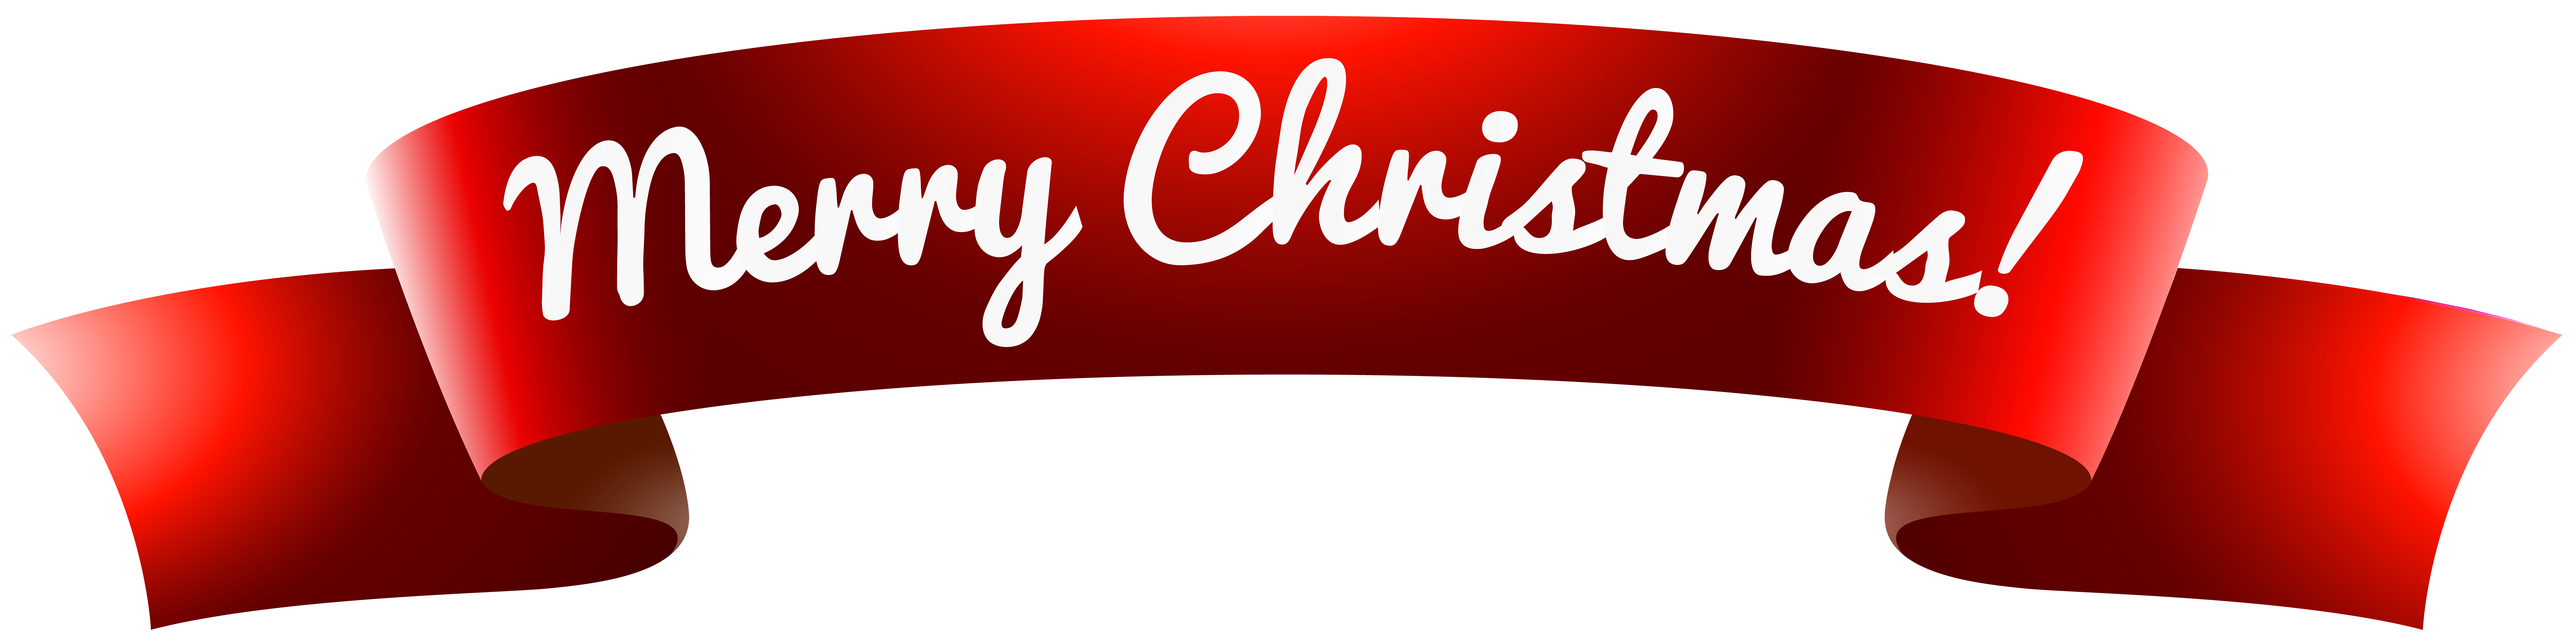 free clipart merry christmas banner - photo #21